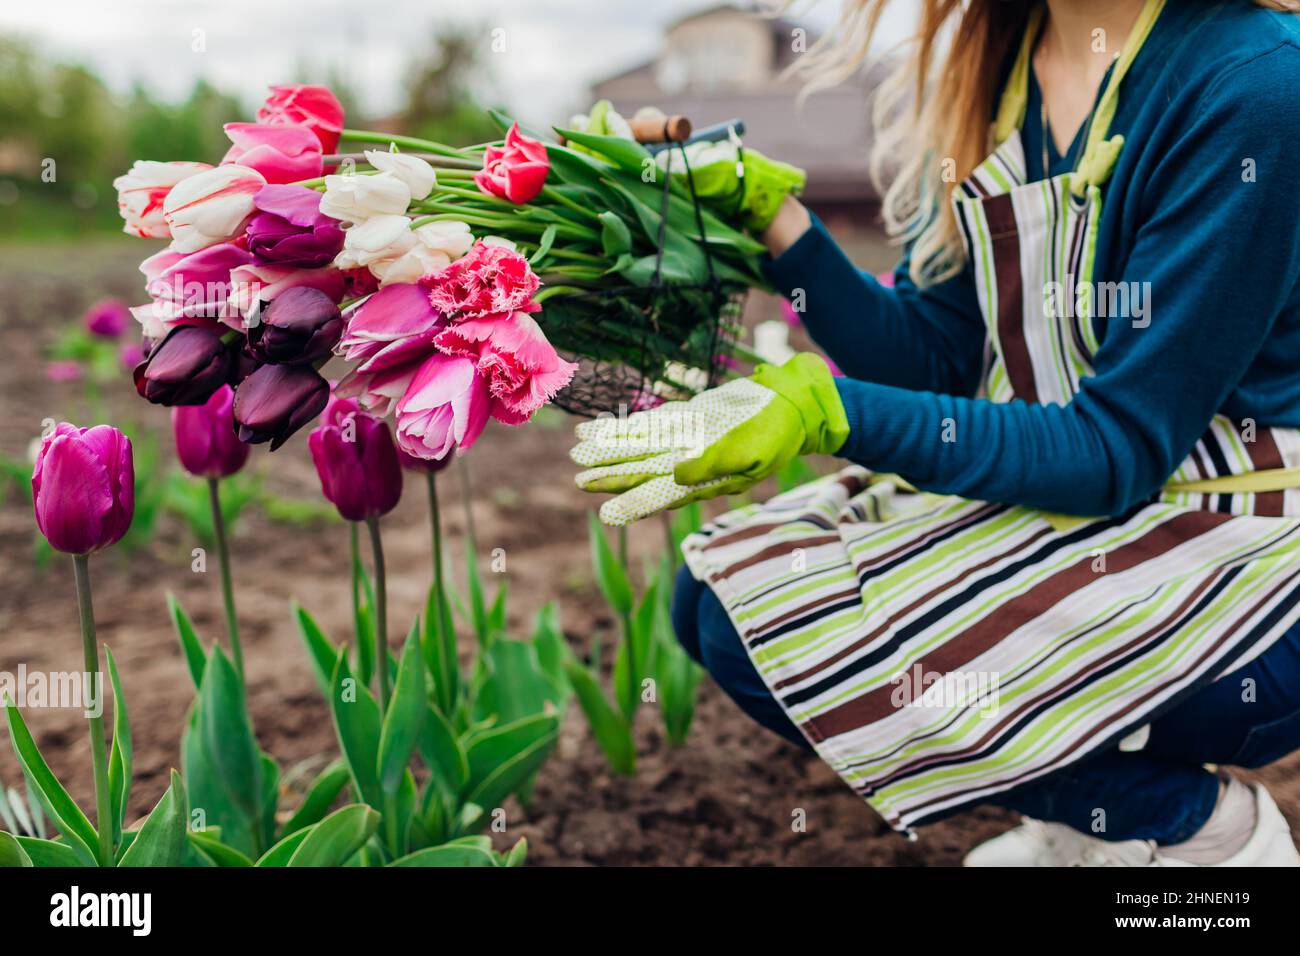 Fresh tulips gathered in metal basket in spring garden. Gardener woman holds purple, white, pink flowers and pruner wearing gloves and apron. Close up Stock Photo